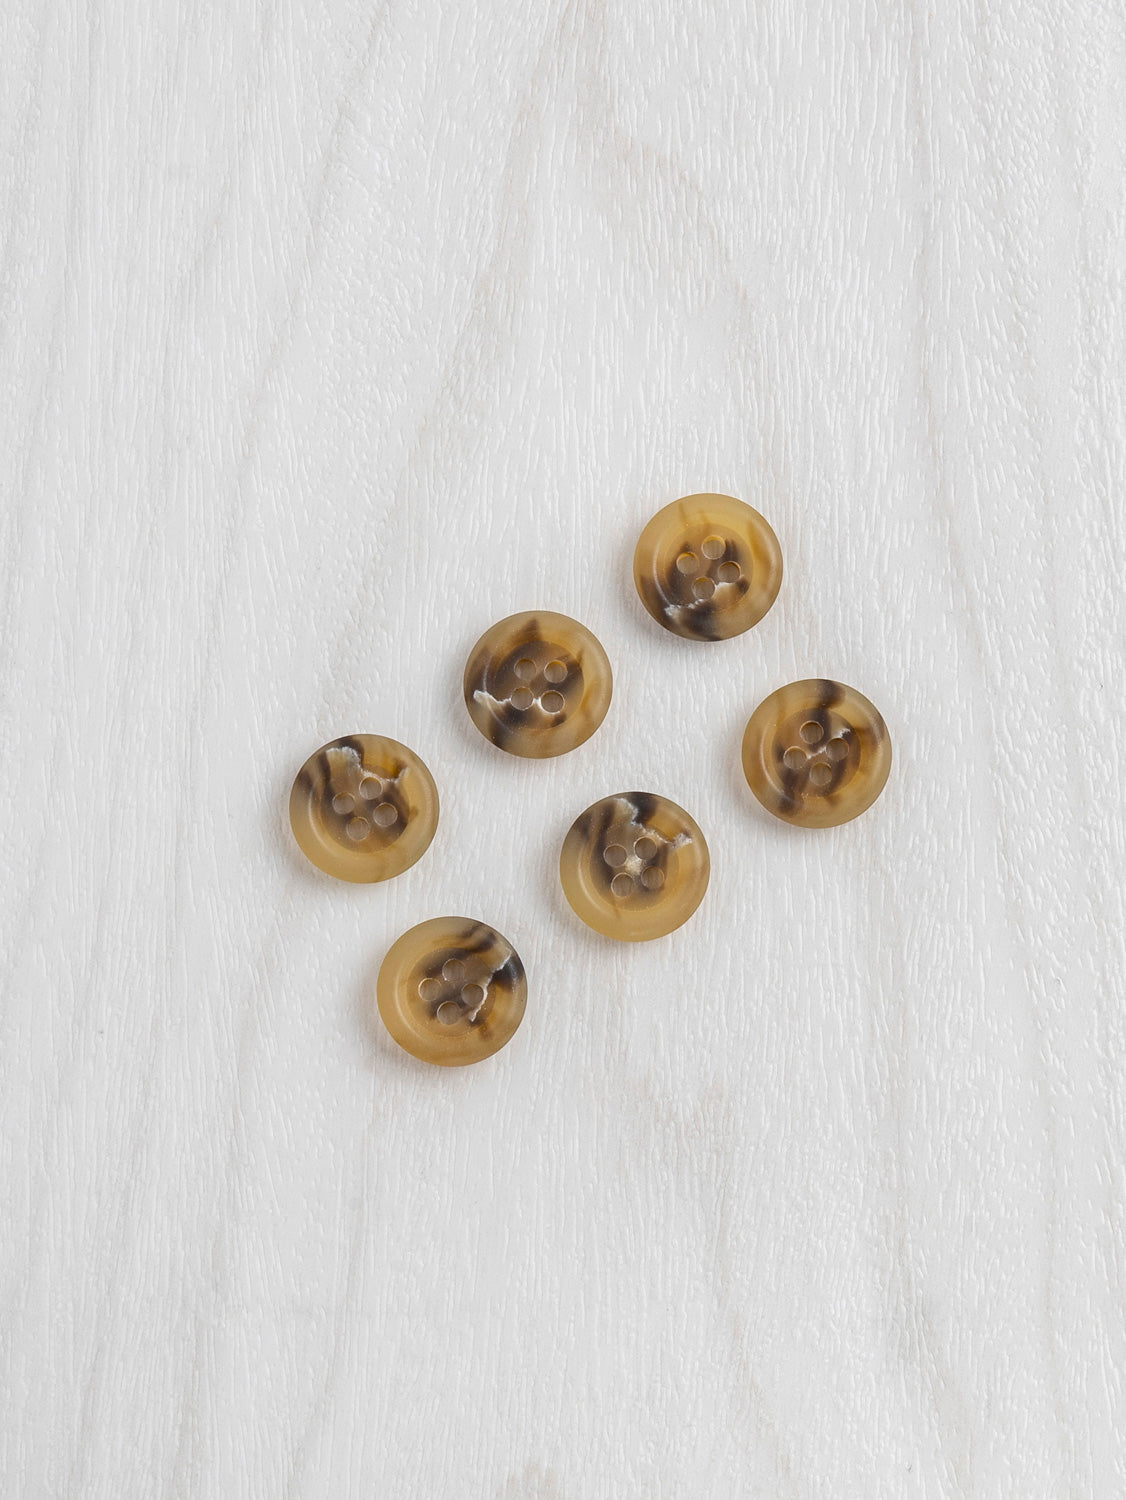 Recycled Paper 16mm (5/8") Buttons - 6 pack